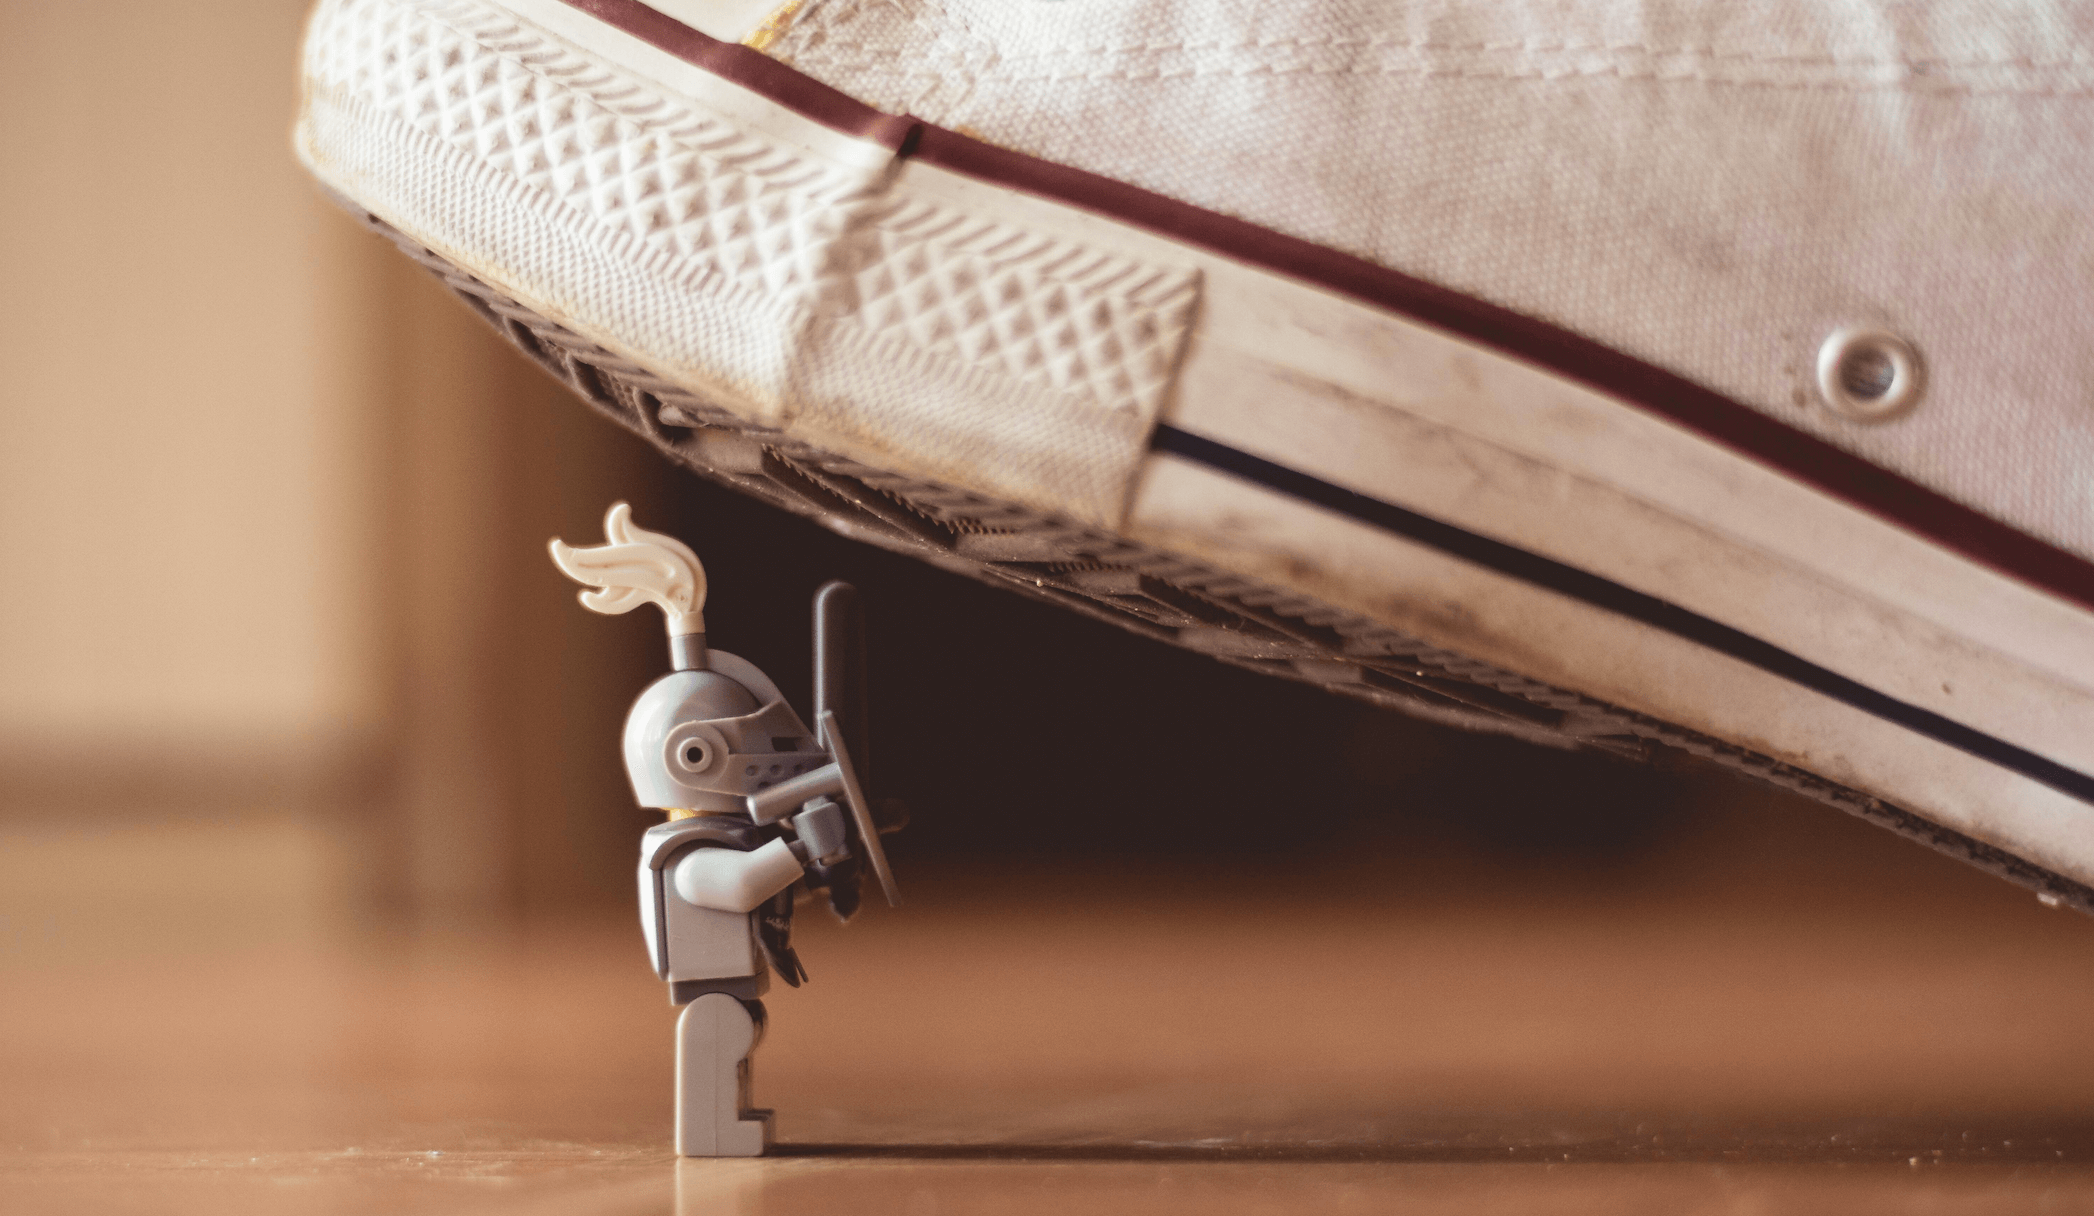 Amazon seller insurance: Image of toy knight by James Pond on Unsplash